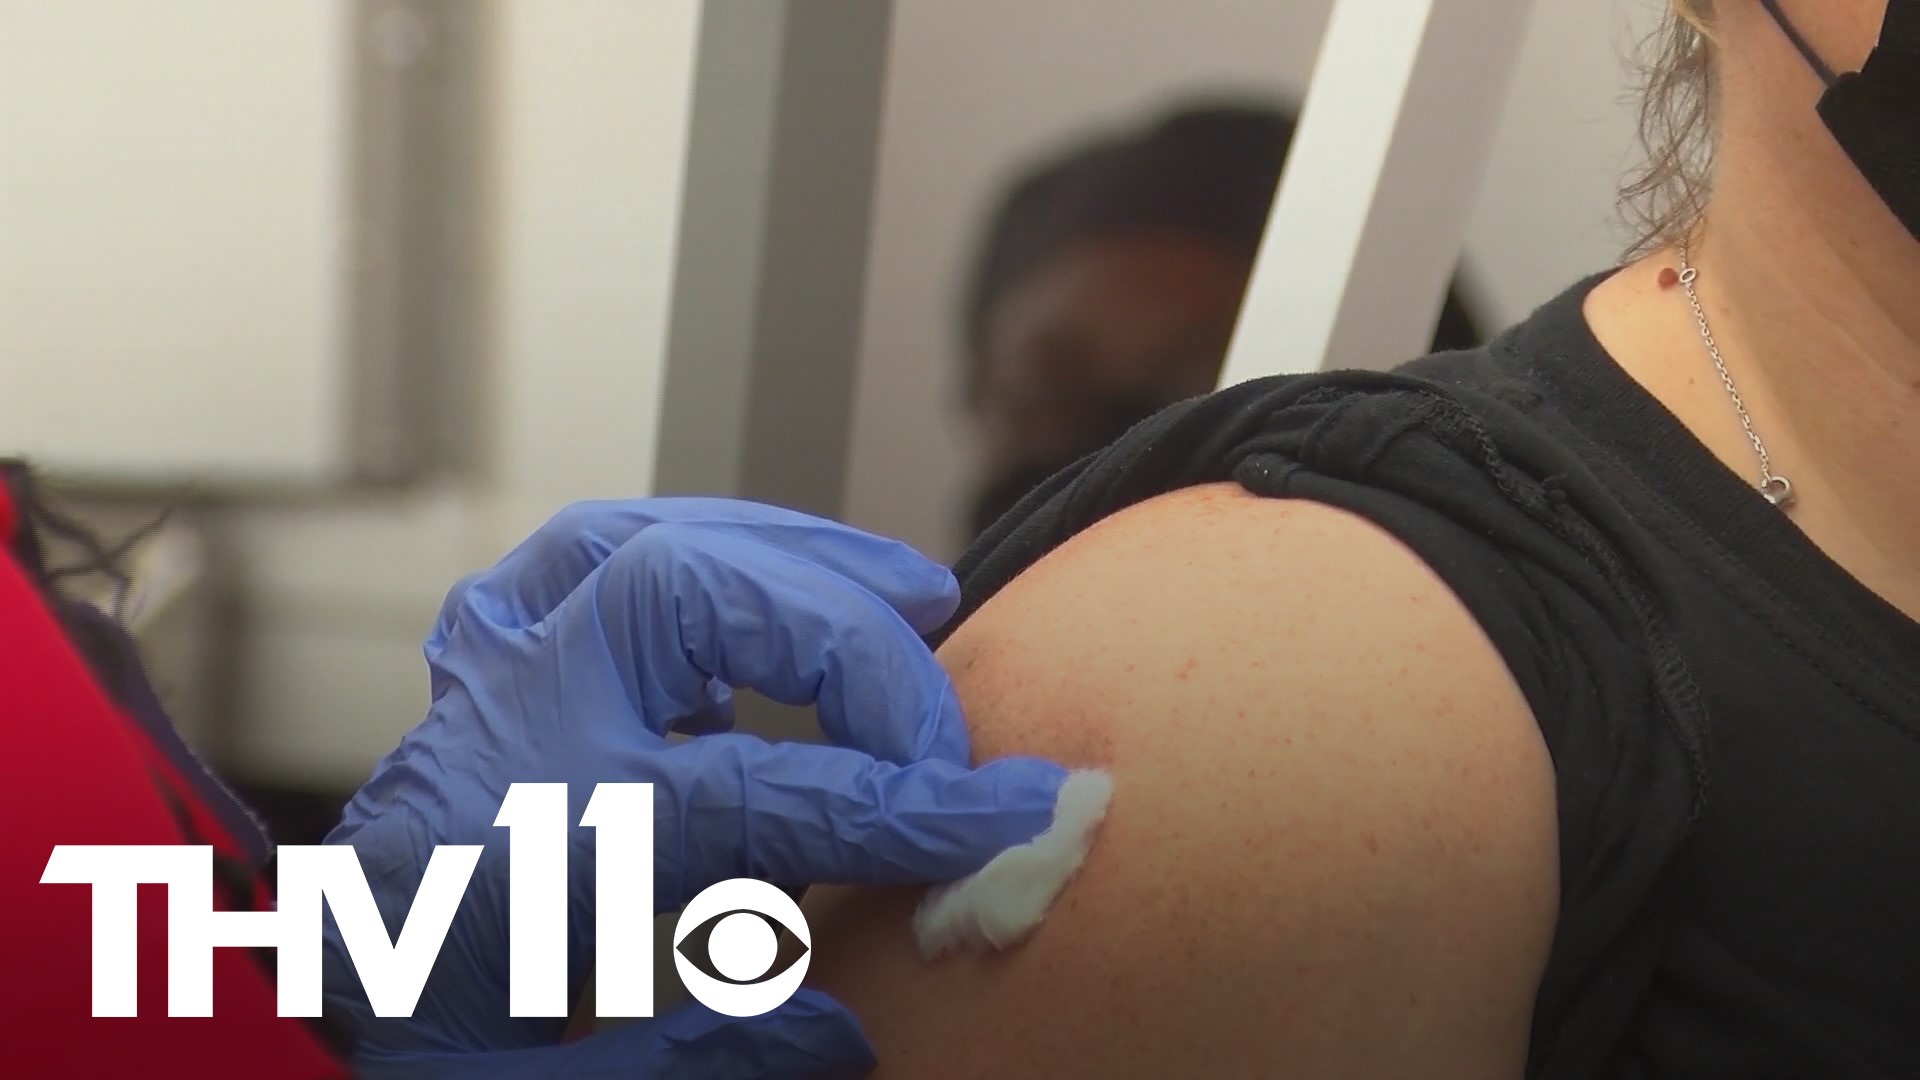 The Arkansas Department of Health is making it easier for those who can't leave their house to get the vaccine.